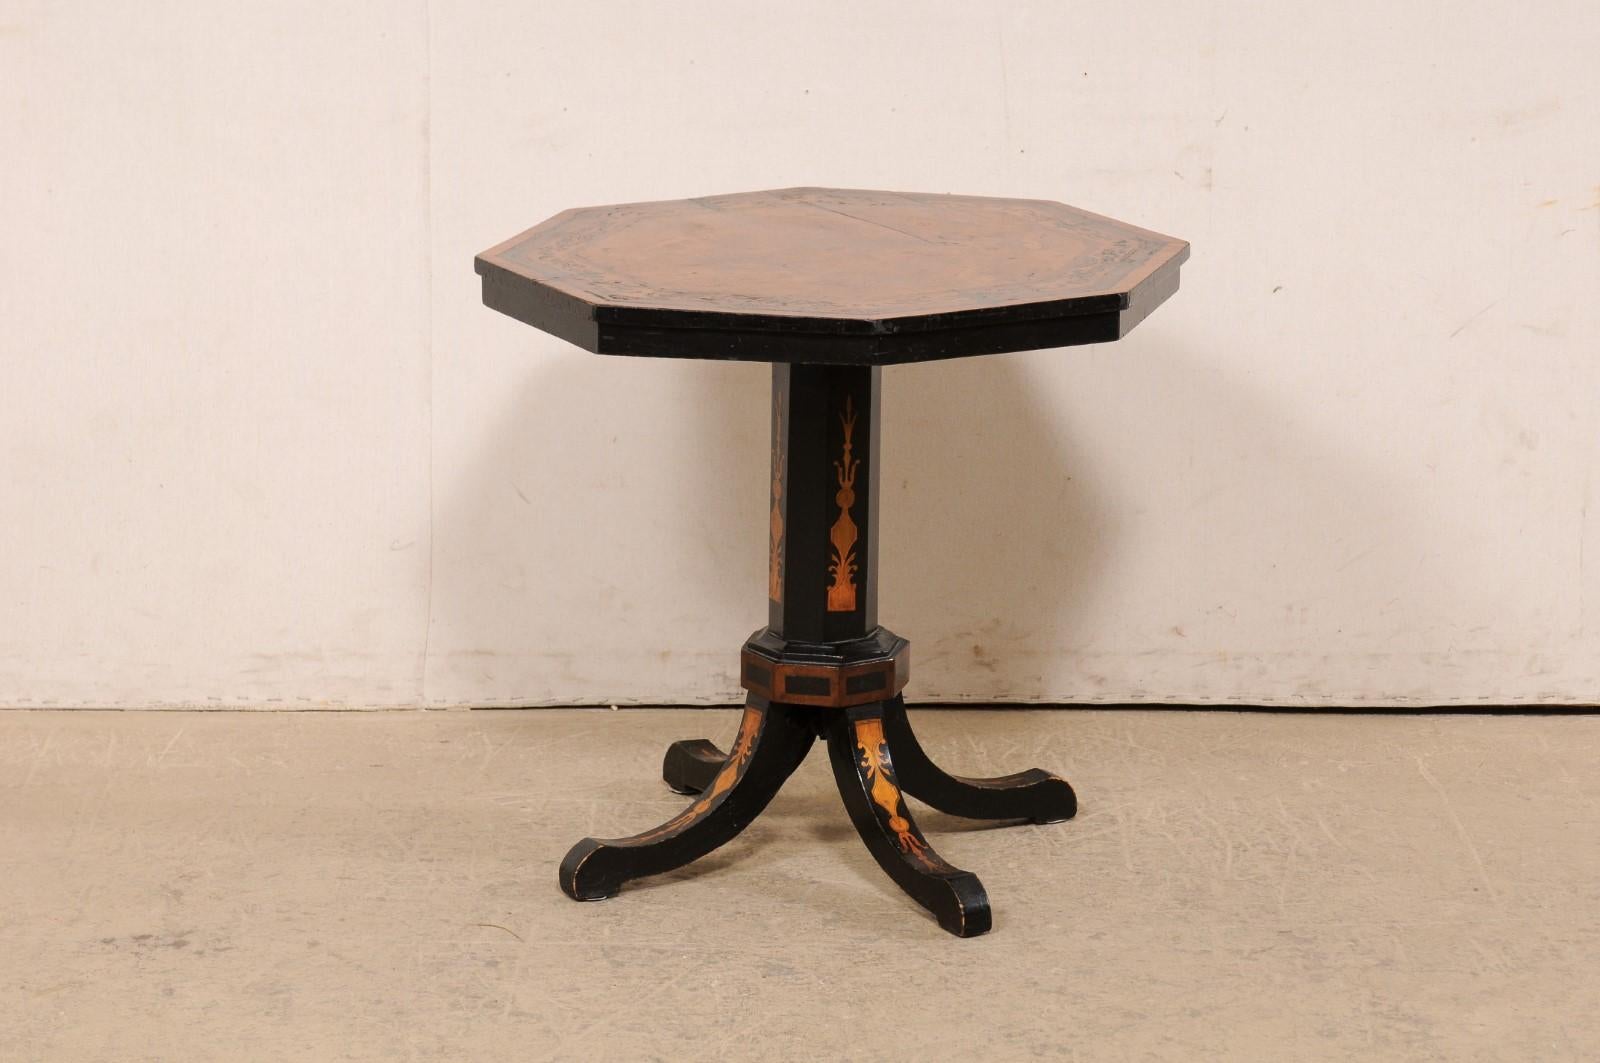 An English wooden pedestal table with nice inlay from the 19th century. This antique occasional table from England has an octagon-shaped top adorn with beautiful wood-grain which has been nicely framed within a decorative foliate inlay and banding